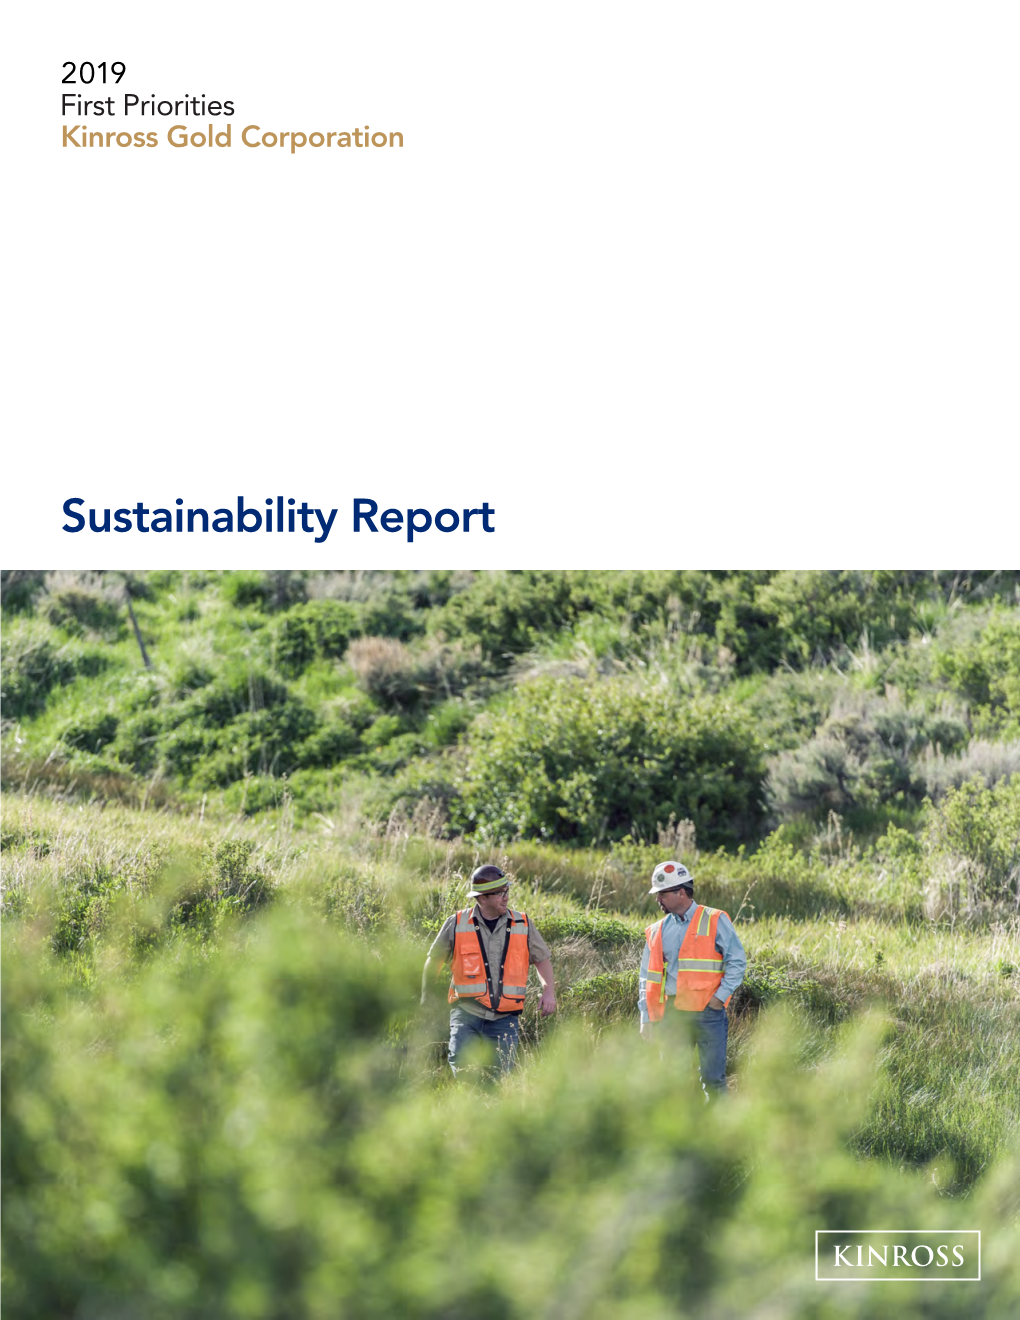 Sustainability Report This Report Chronicles Our Progress Over the Past Two Years in Delivering on Our Commitment to Responsible Mining